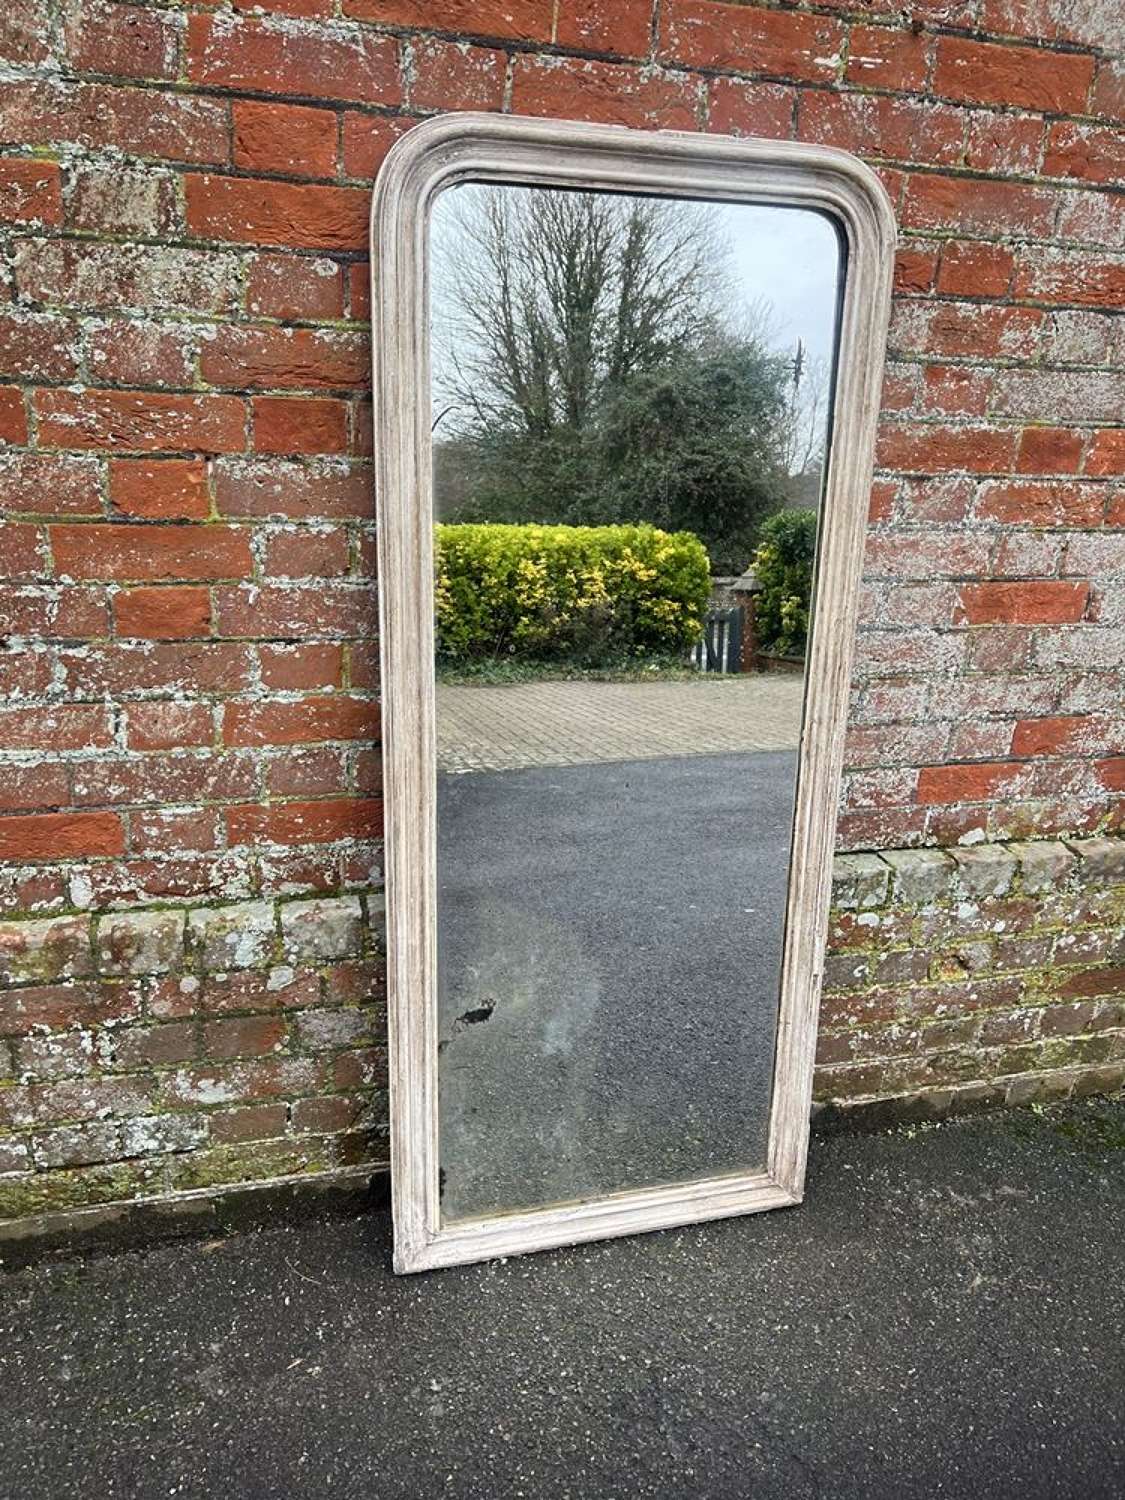 A Delightful large Antique French 19th C arched top painted Mirror.